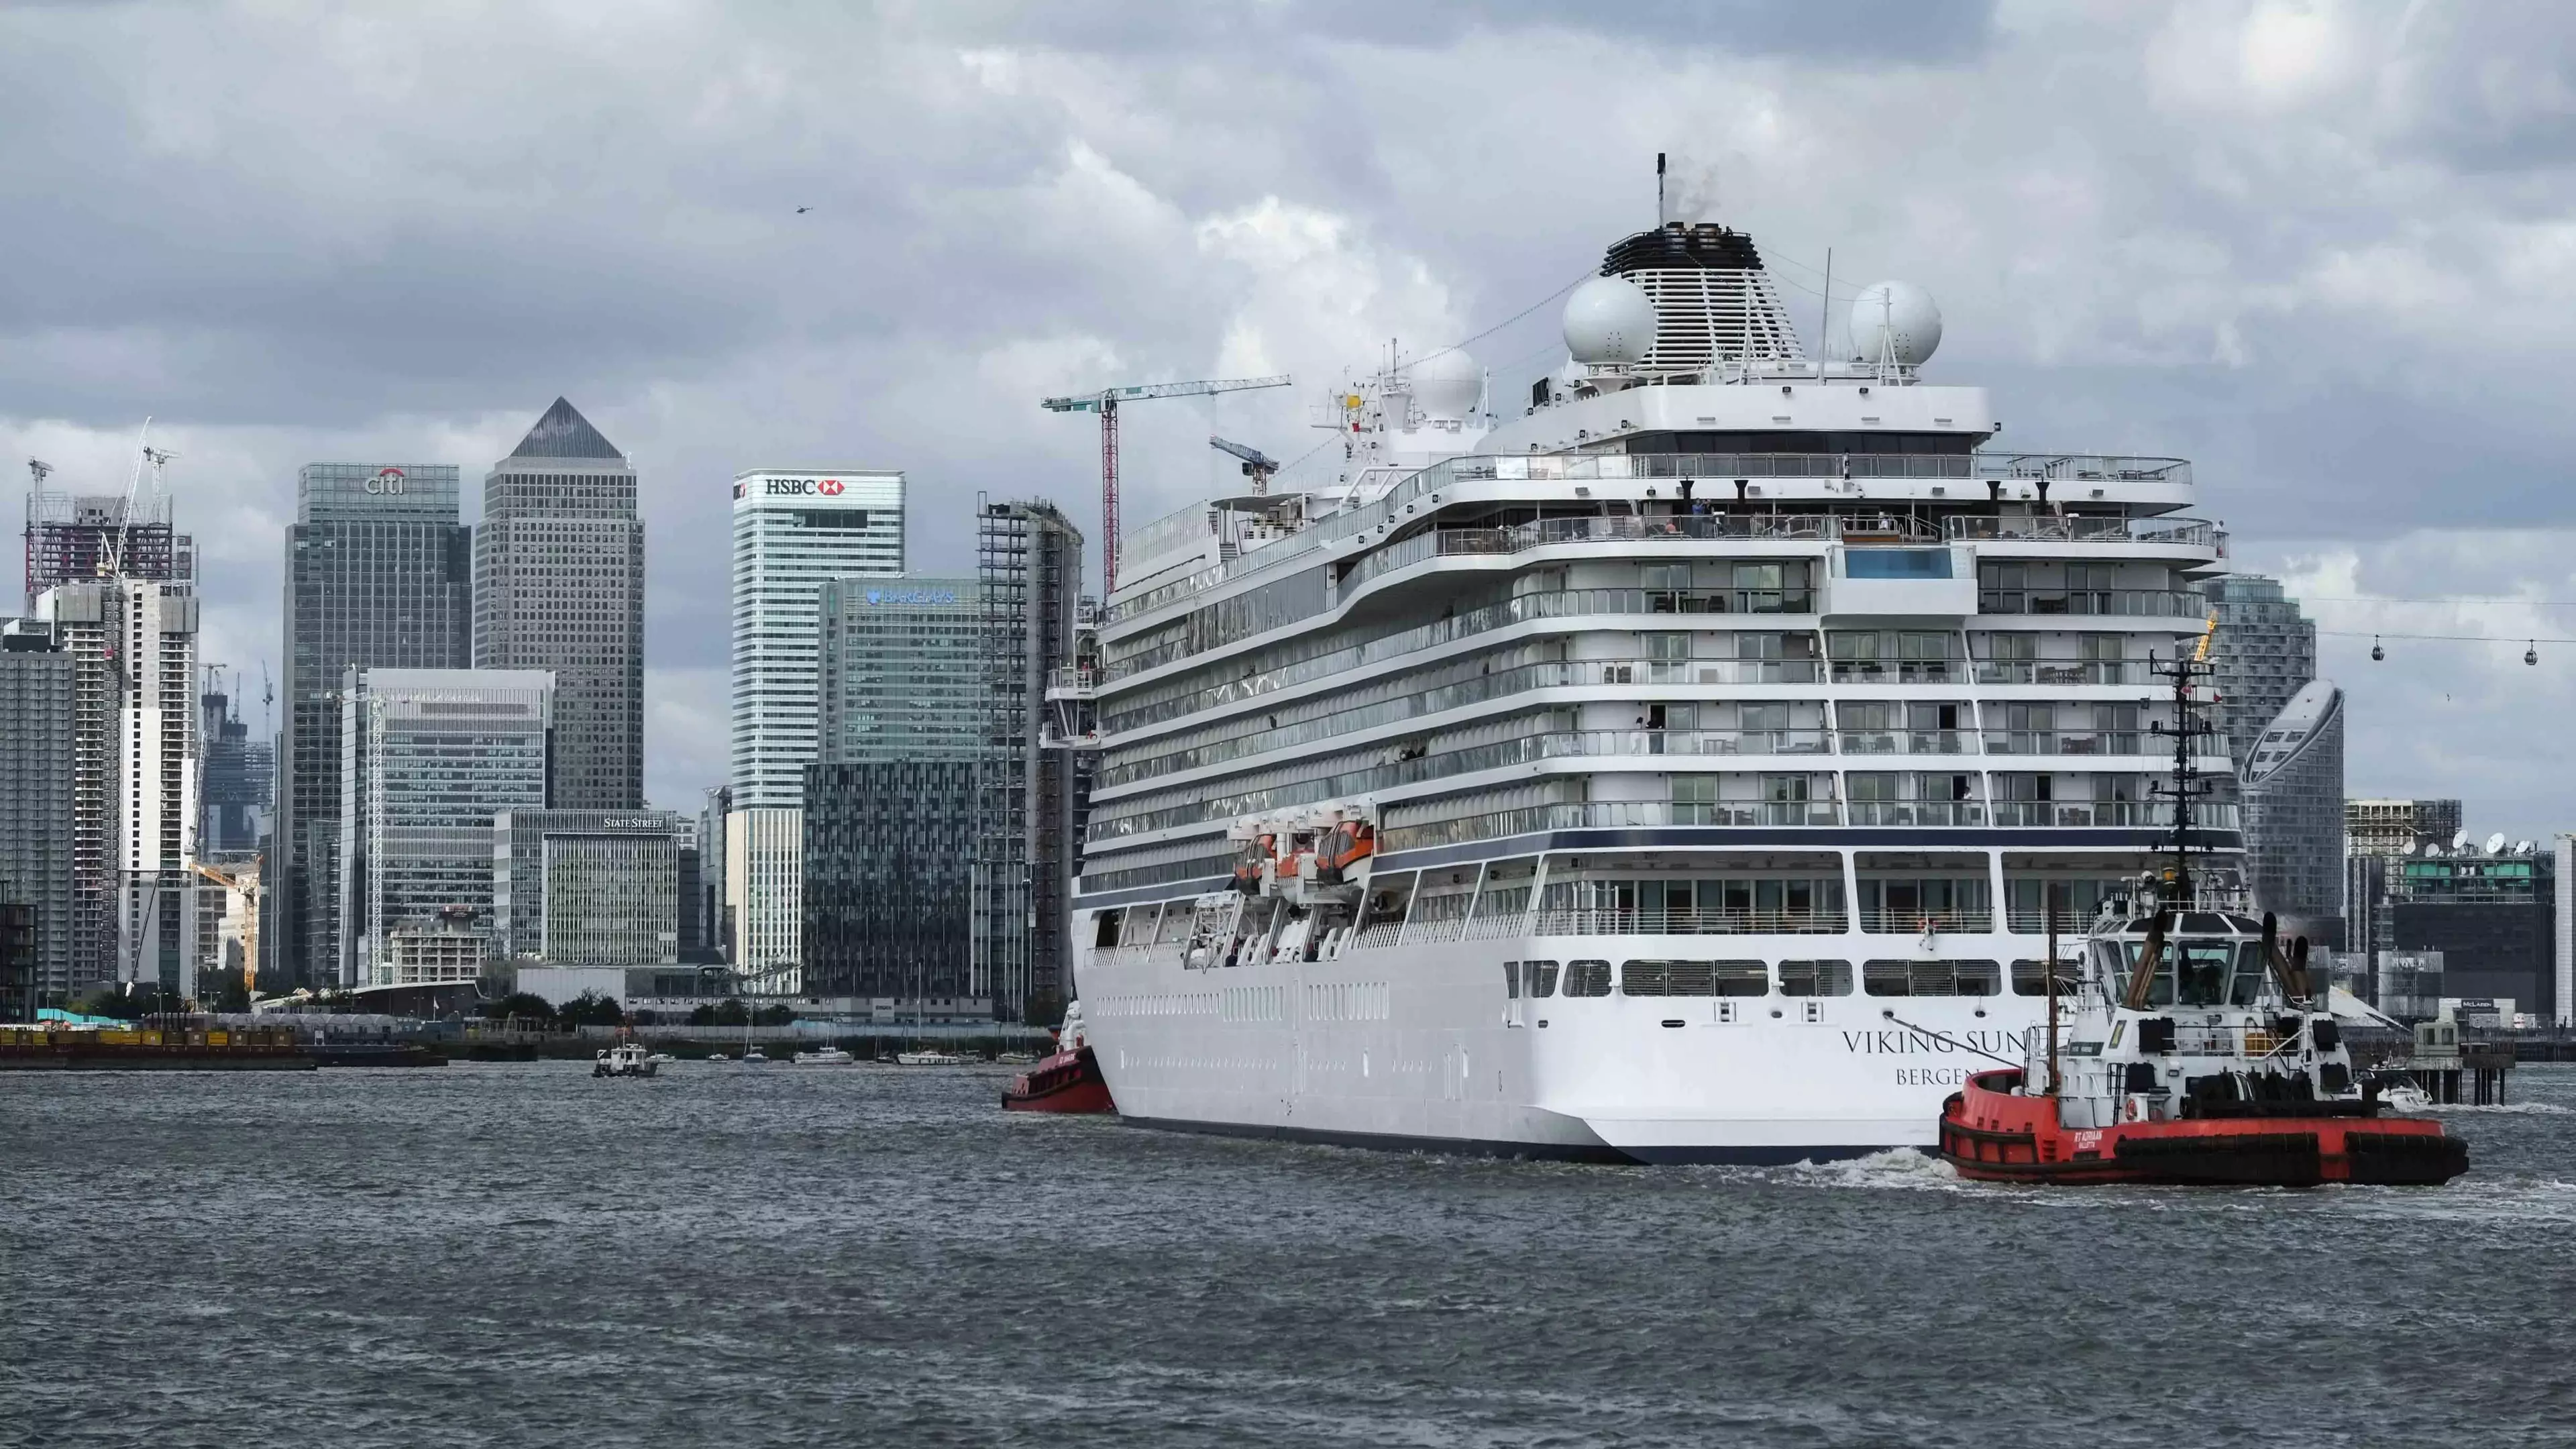 World's Longest Cruise To Set Sail From London For 245-Day Voyage